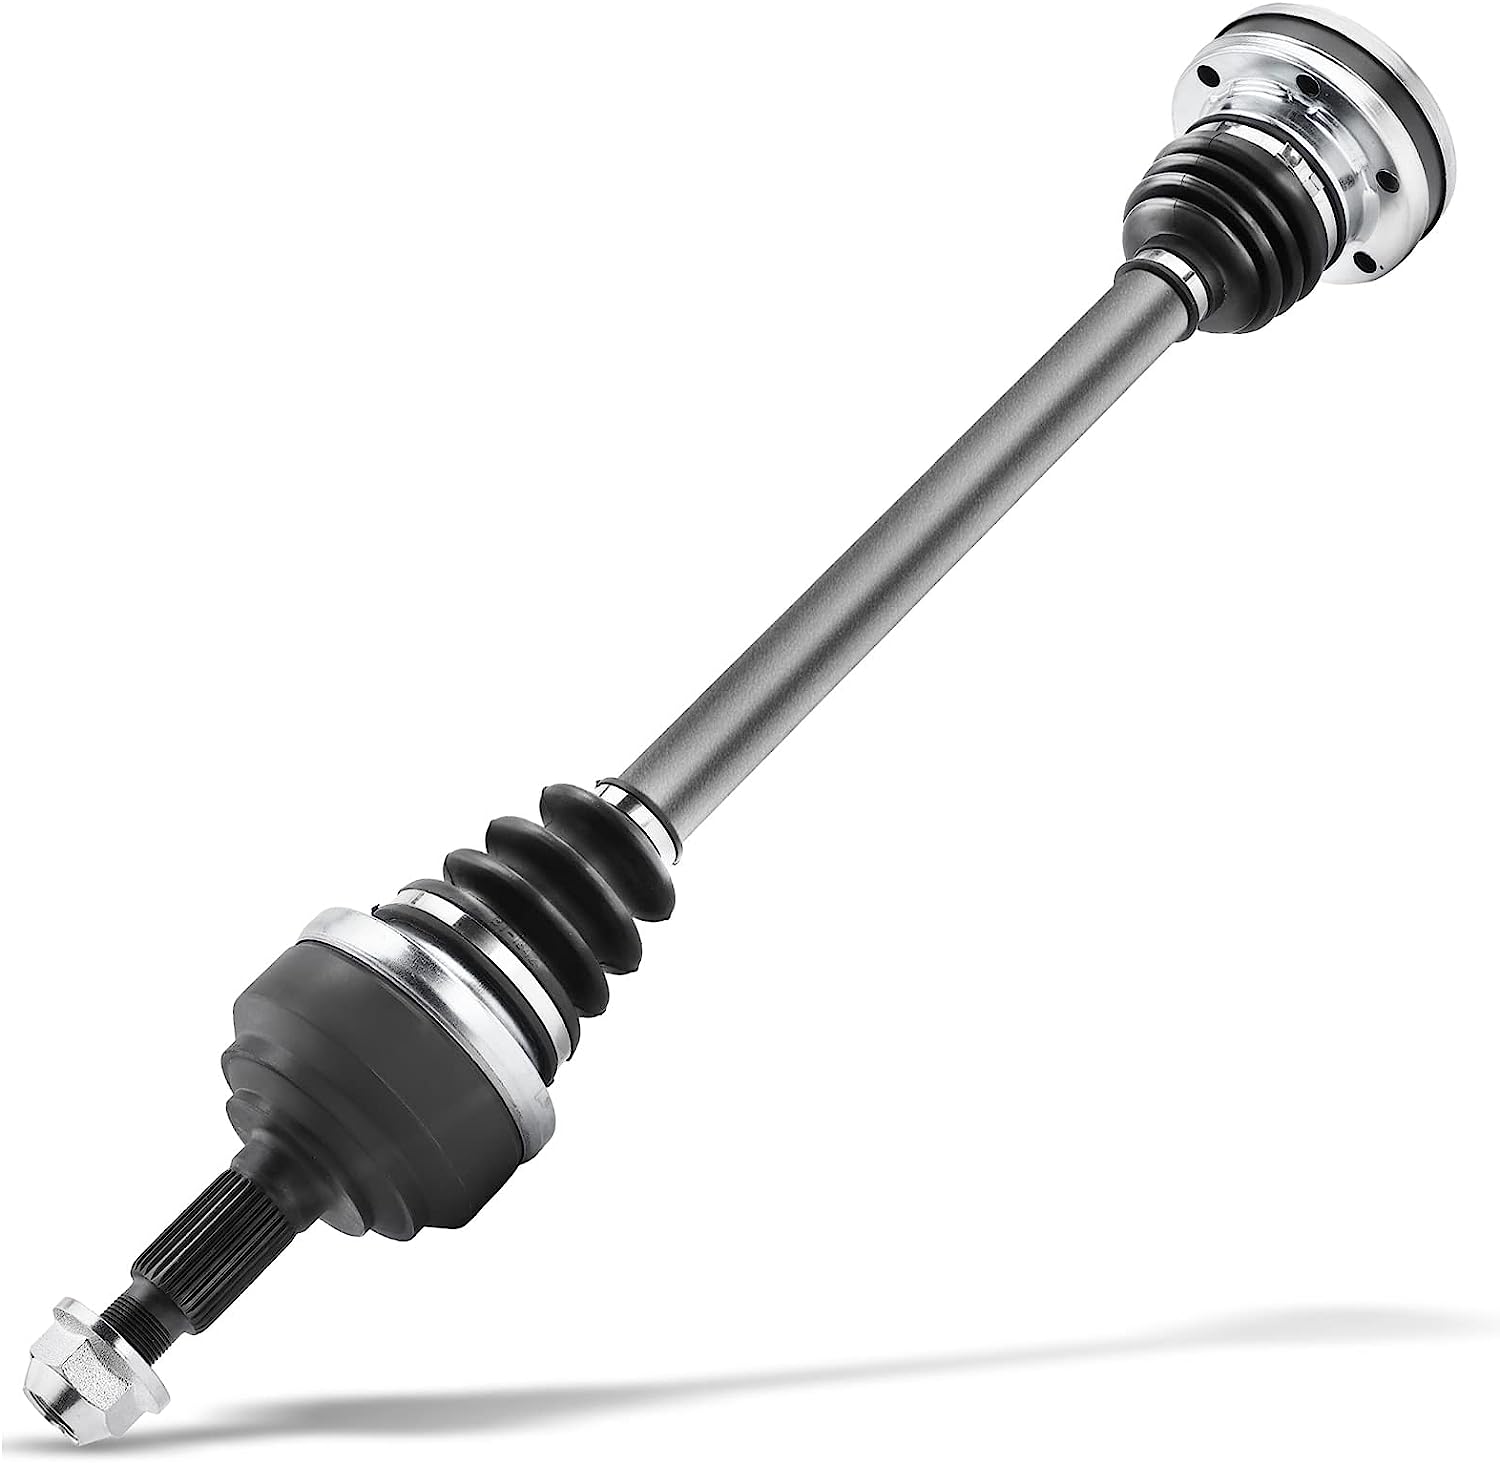 A-Premium CV Axle Shaft Assembly Compatible with Audi Q7 2009 & Porsche Cayenne 2004-2006 2008-2010 & Volkswagen Touareg 2004-2010, Rear Left or Right - image 1 of 9